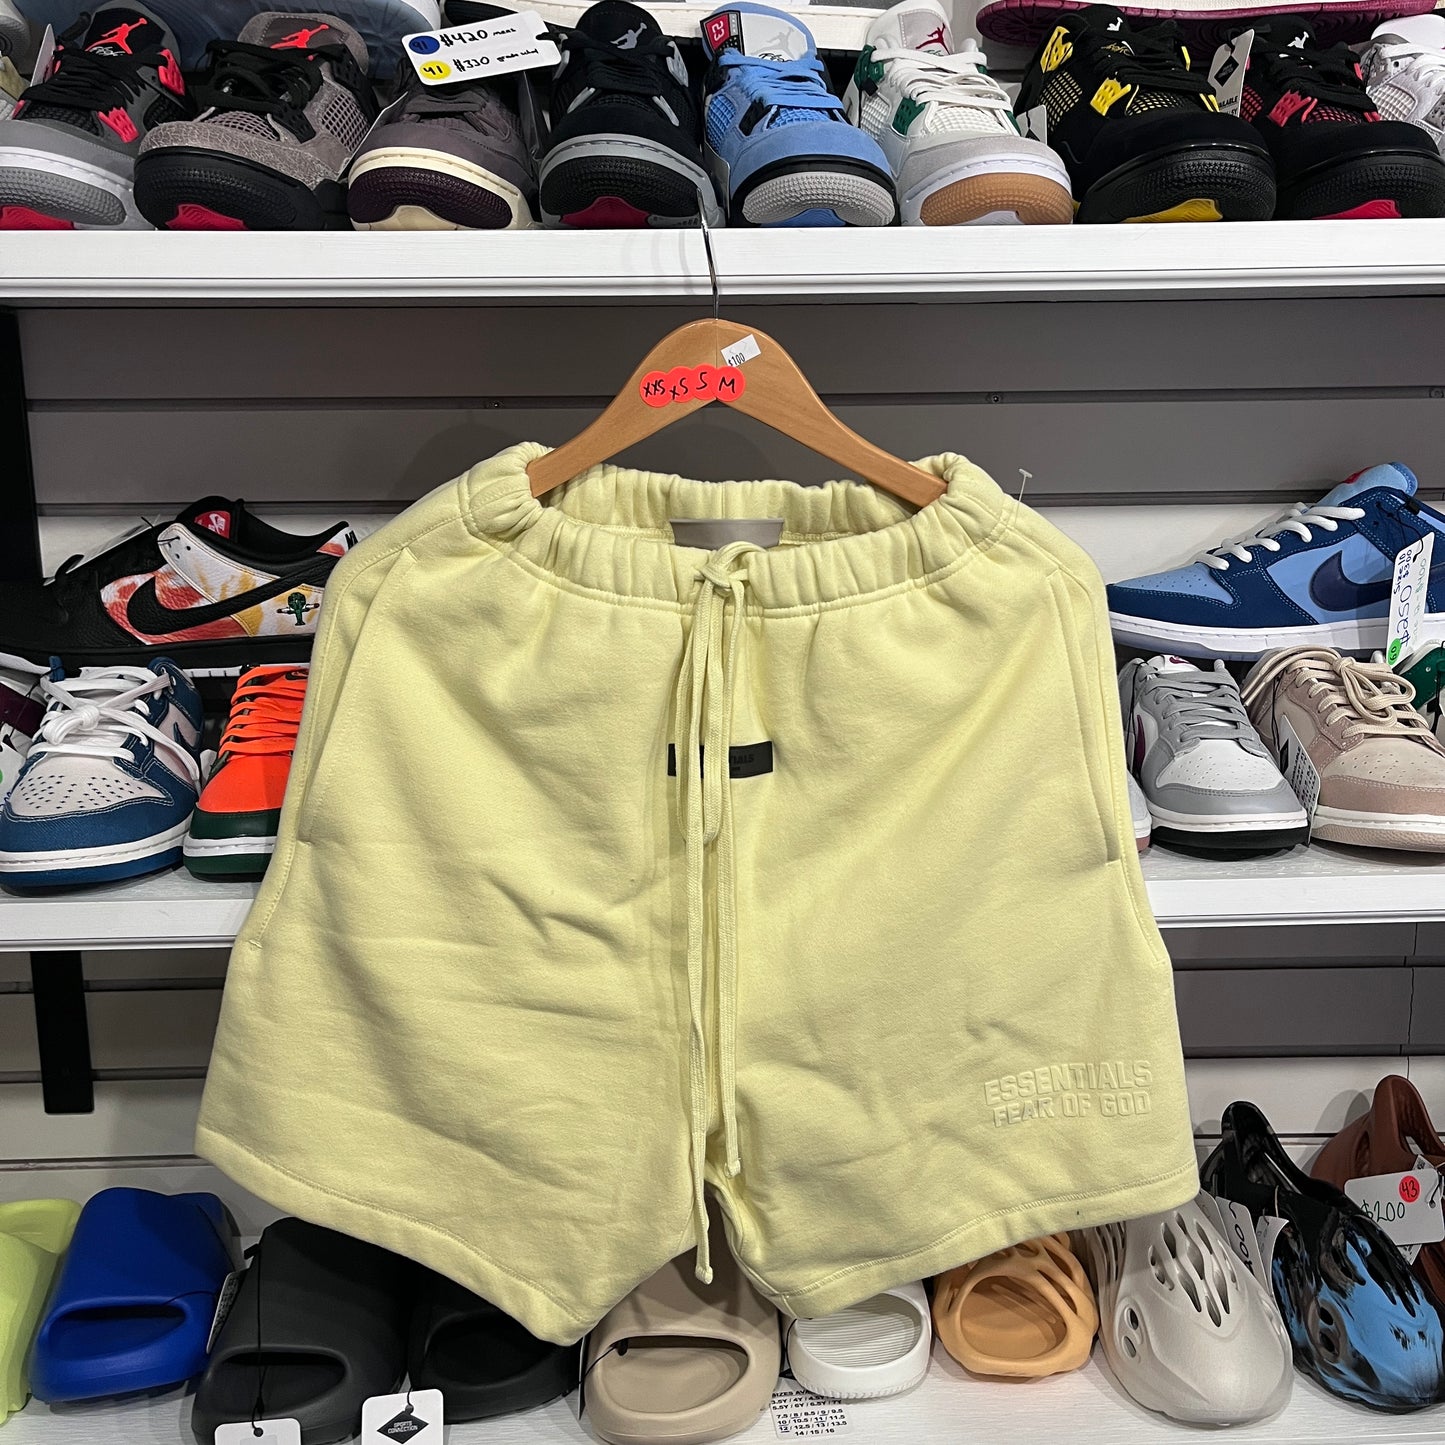 Essentials Fear of God Canary Shorts